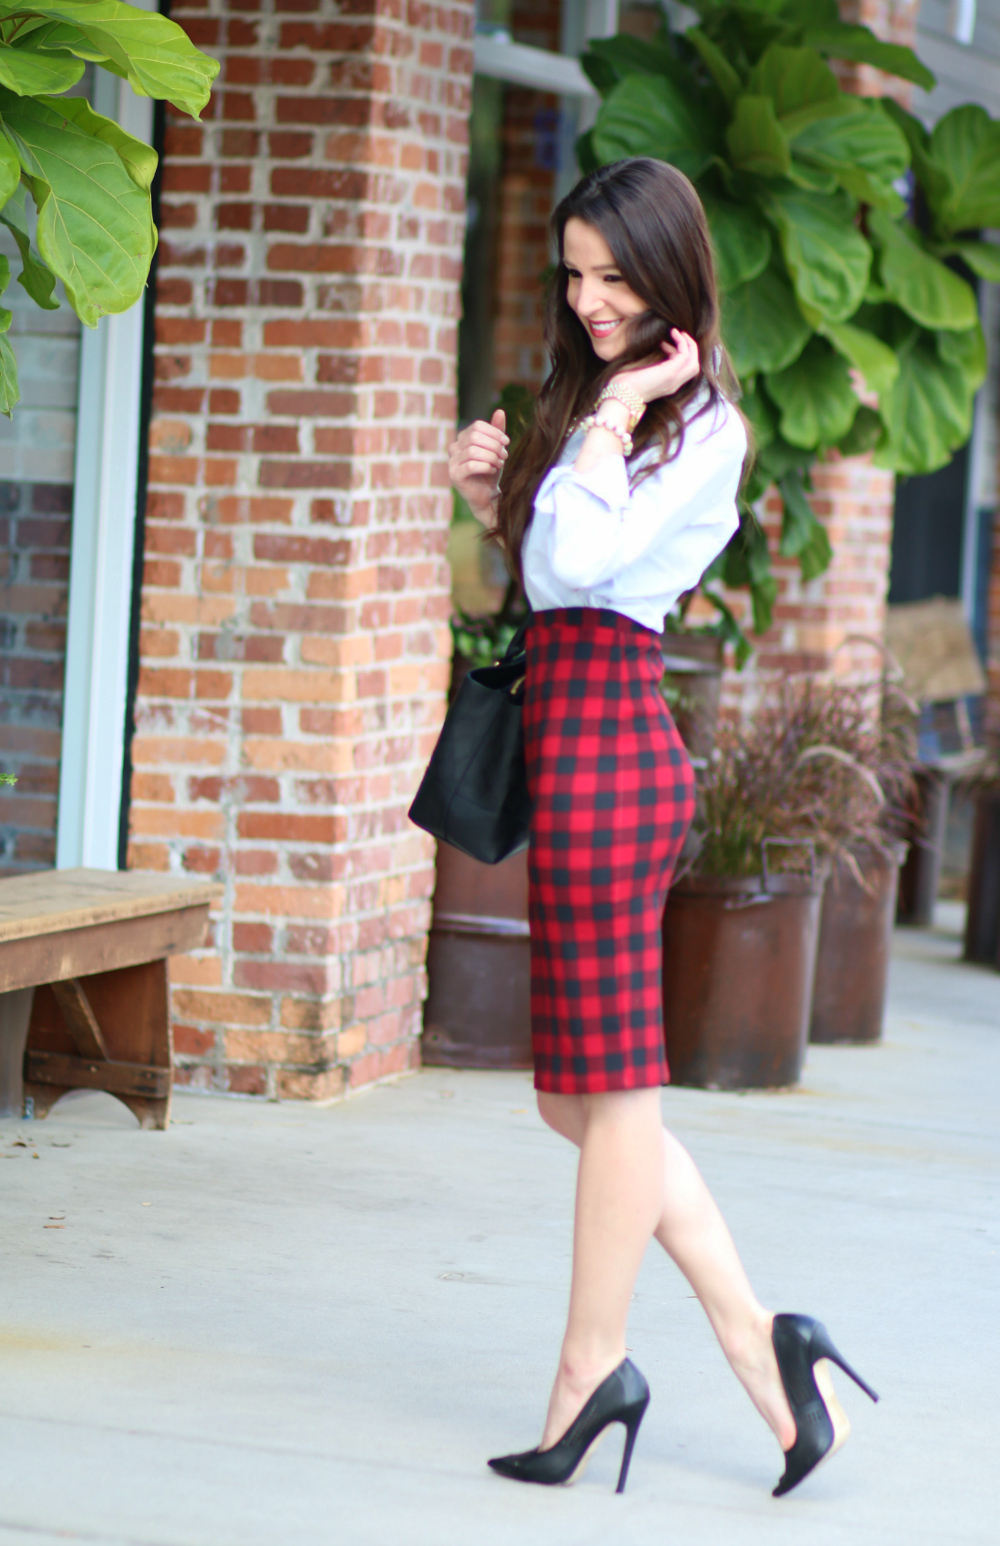 Red Plaid Pencil Skirt, Preppy Pencil Skirt, Plaid Pencil Skirt, St. Ives Oatmeal, St. Ives Radiance Boost Bowl, St. Ives Nourish & Soothe Oatmeal & Shea Butter Body Lotion, St. Ives Nourished & Smooth Oatmeal Body Scrub, 